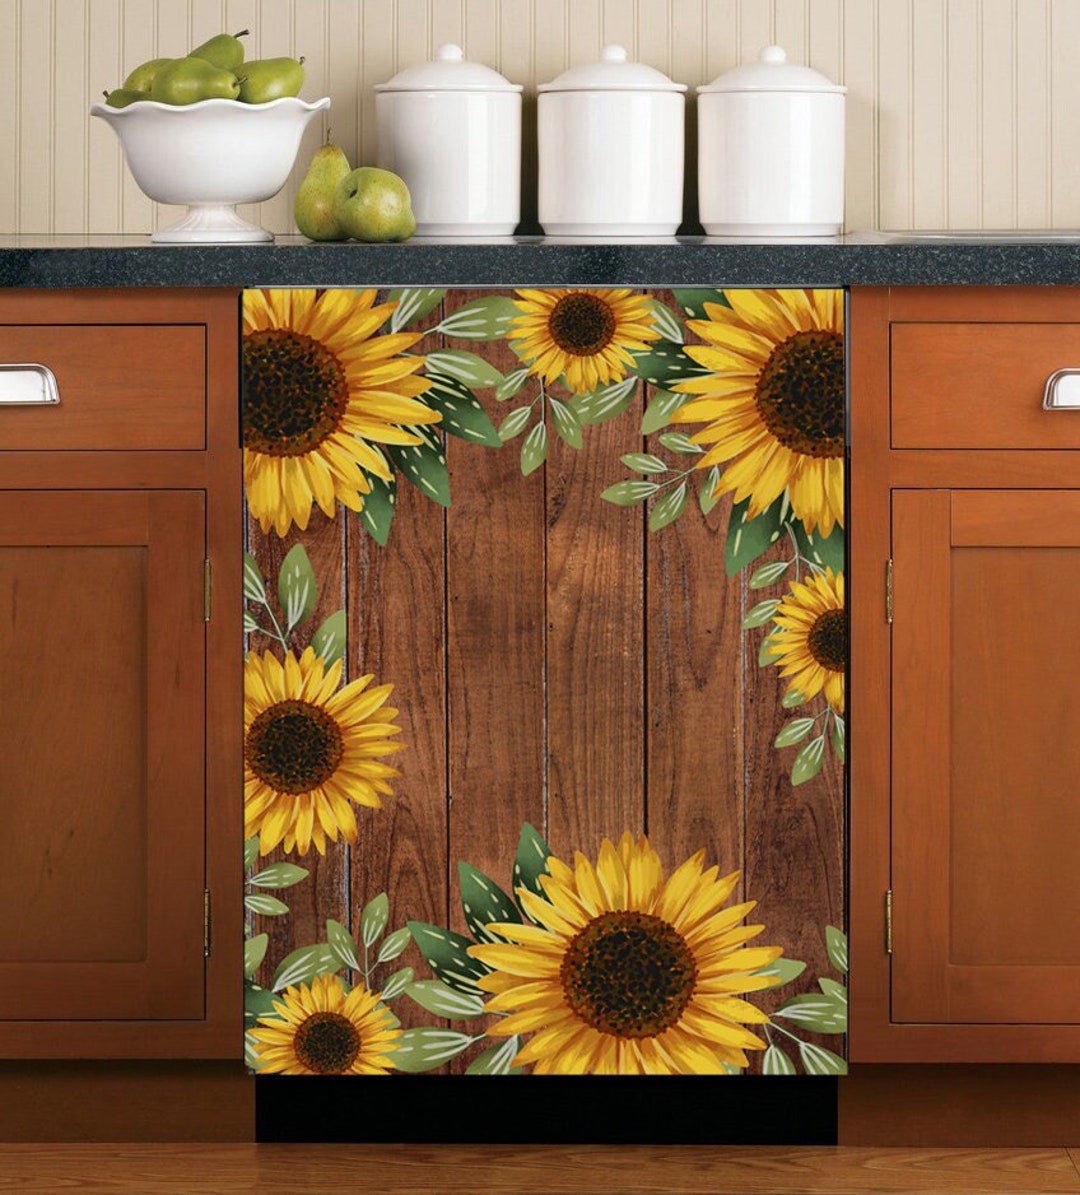  WOWFEEL Rustic Wooden Barn Door Dishwasher Magnet Cover Country  Fridge Vinyl Stickers, Vase Sunflower Refrigerator Magnetic Skins Cover  (Reusable, 23x17Magnetic) : Home & Kitchen